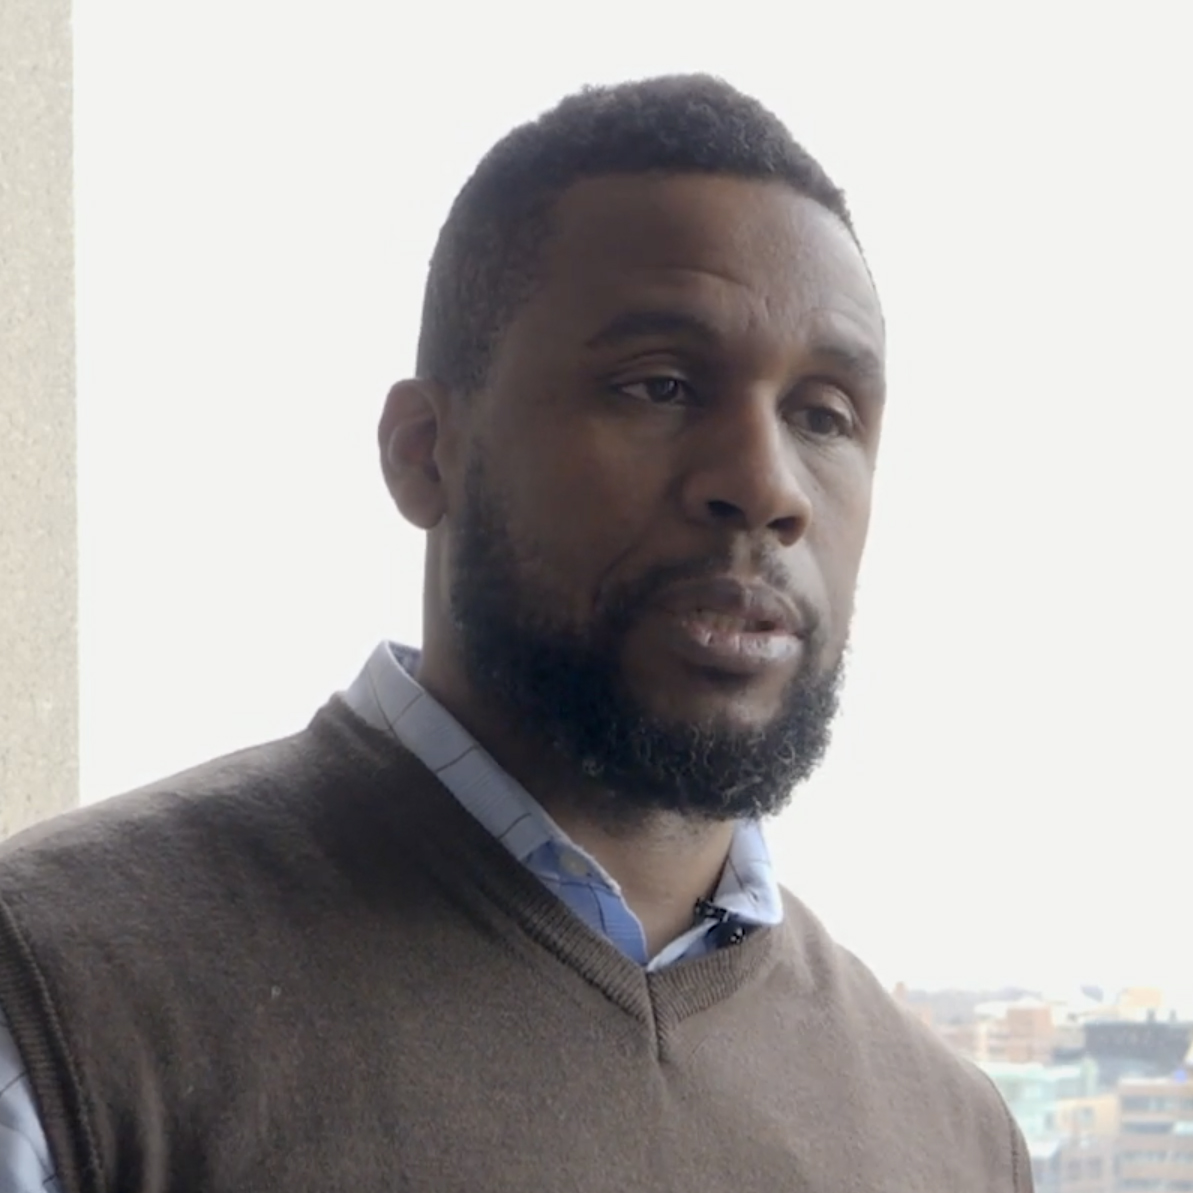 Prof. Lance McCready wants to improve the educational trajectories of black youth